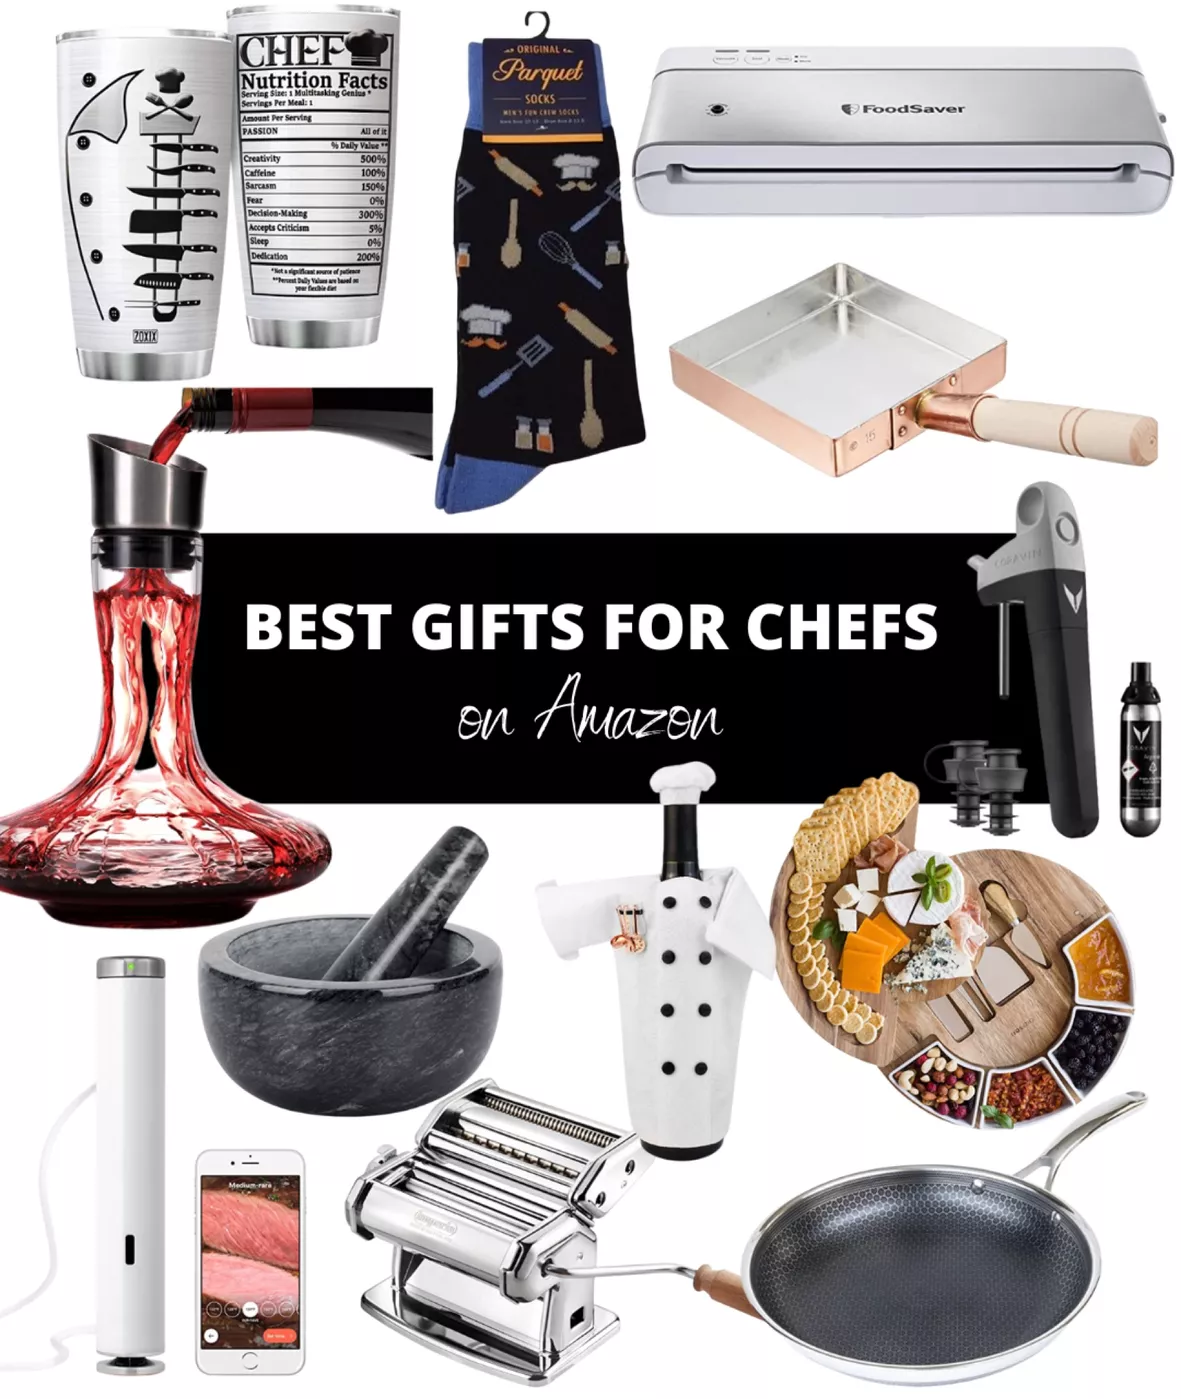 Top Gifts for Chefs